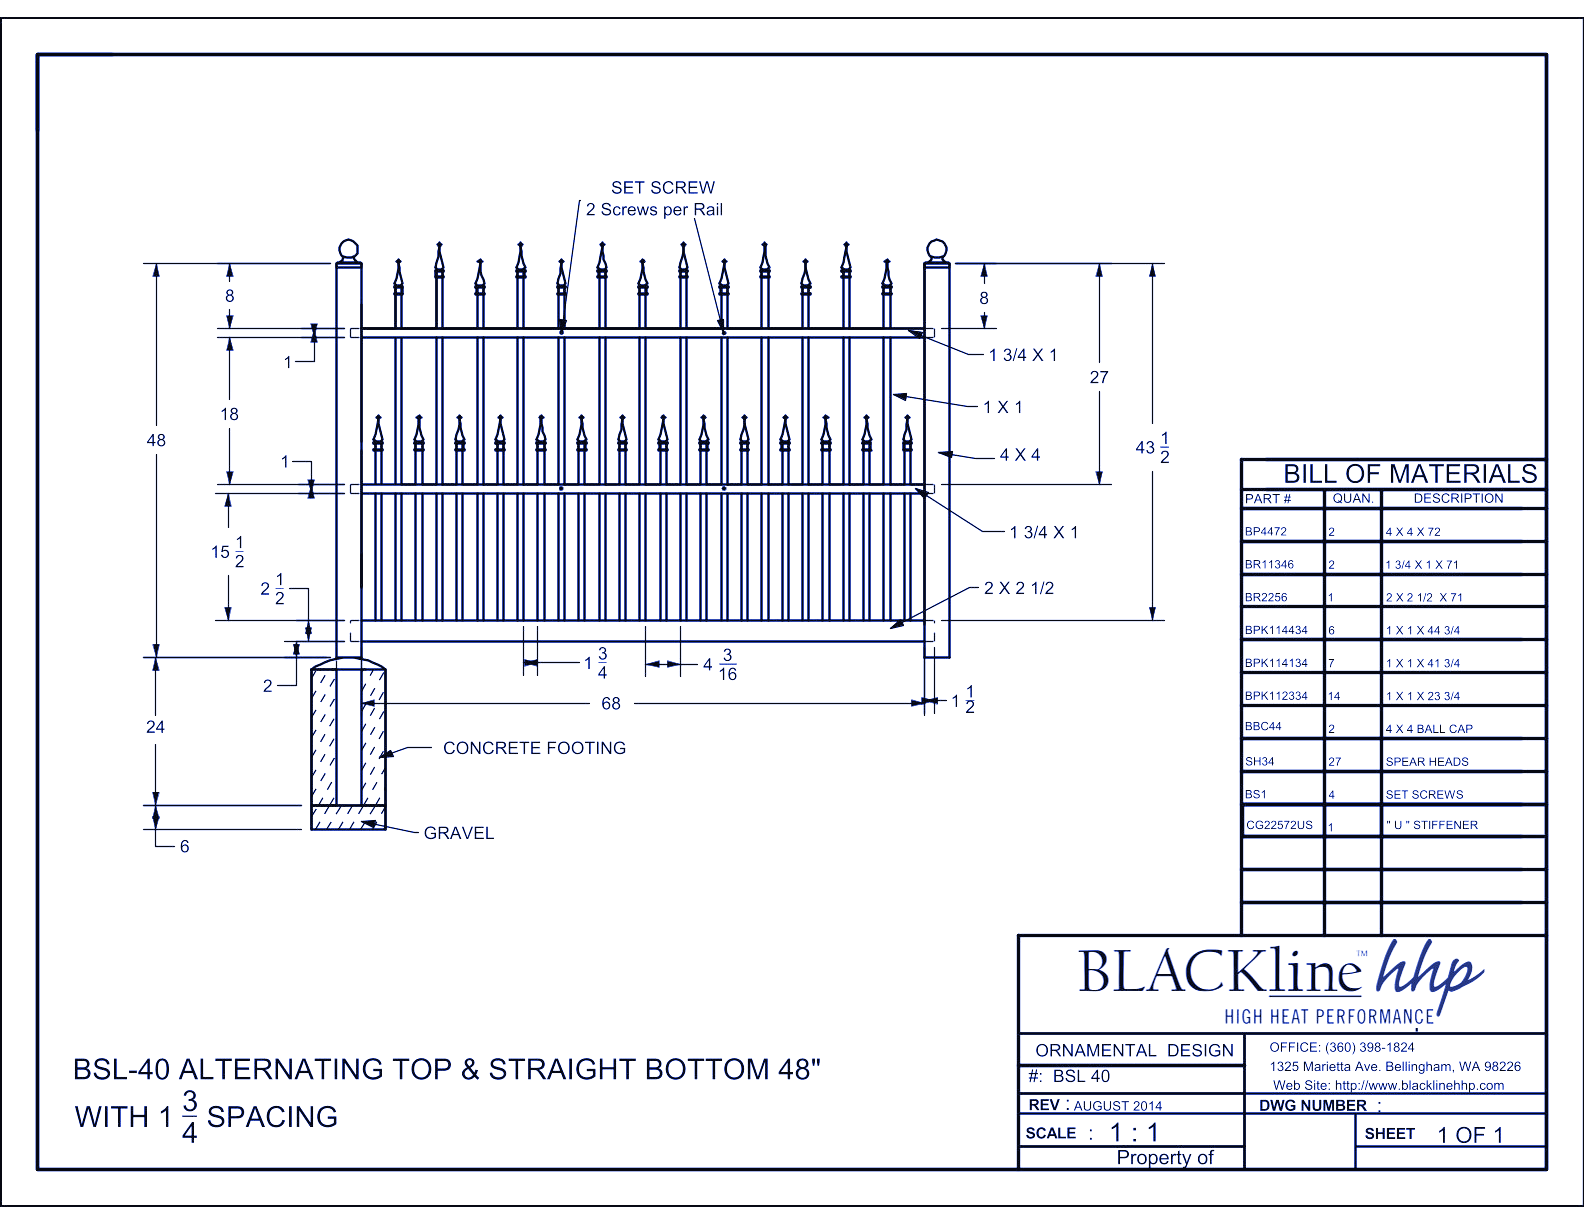 BSL-40: Alternating Top & Straight Bottom 48" with 1 3/4” Spacing